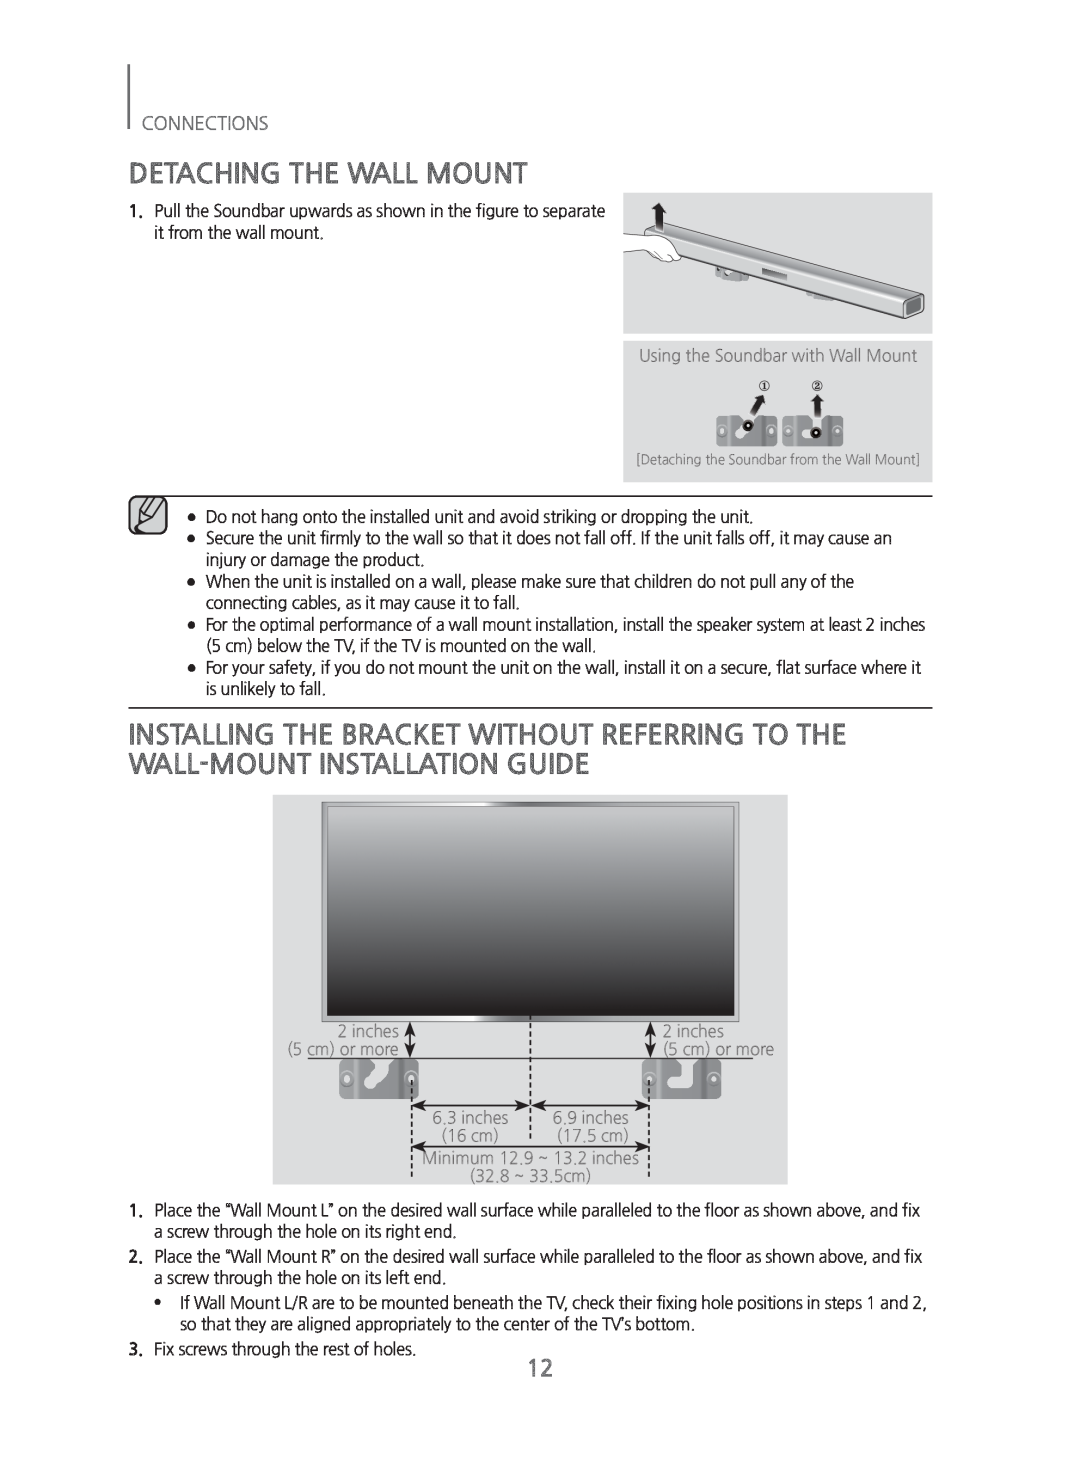 Samsung HW-H450/ZA manual Detaching The Wall Mount, Connections 